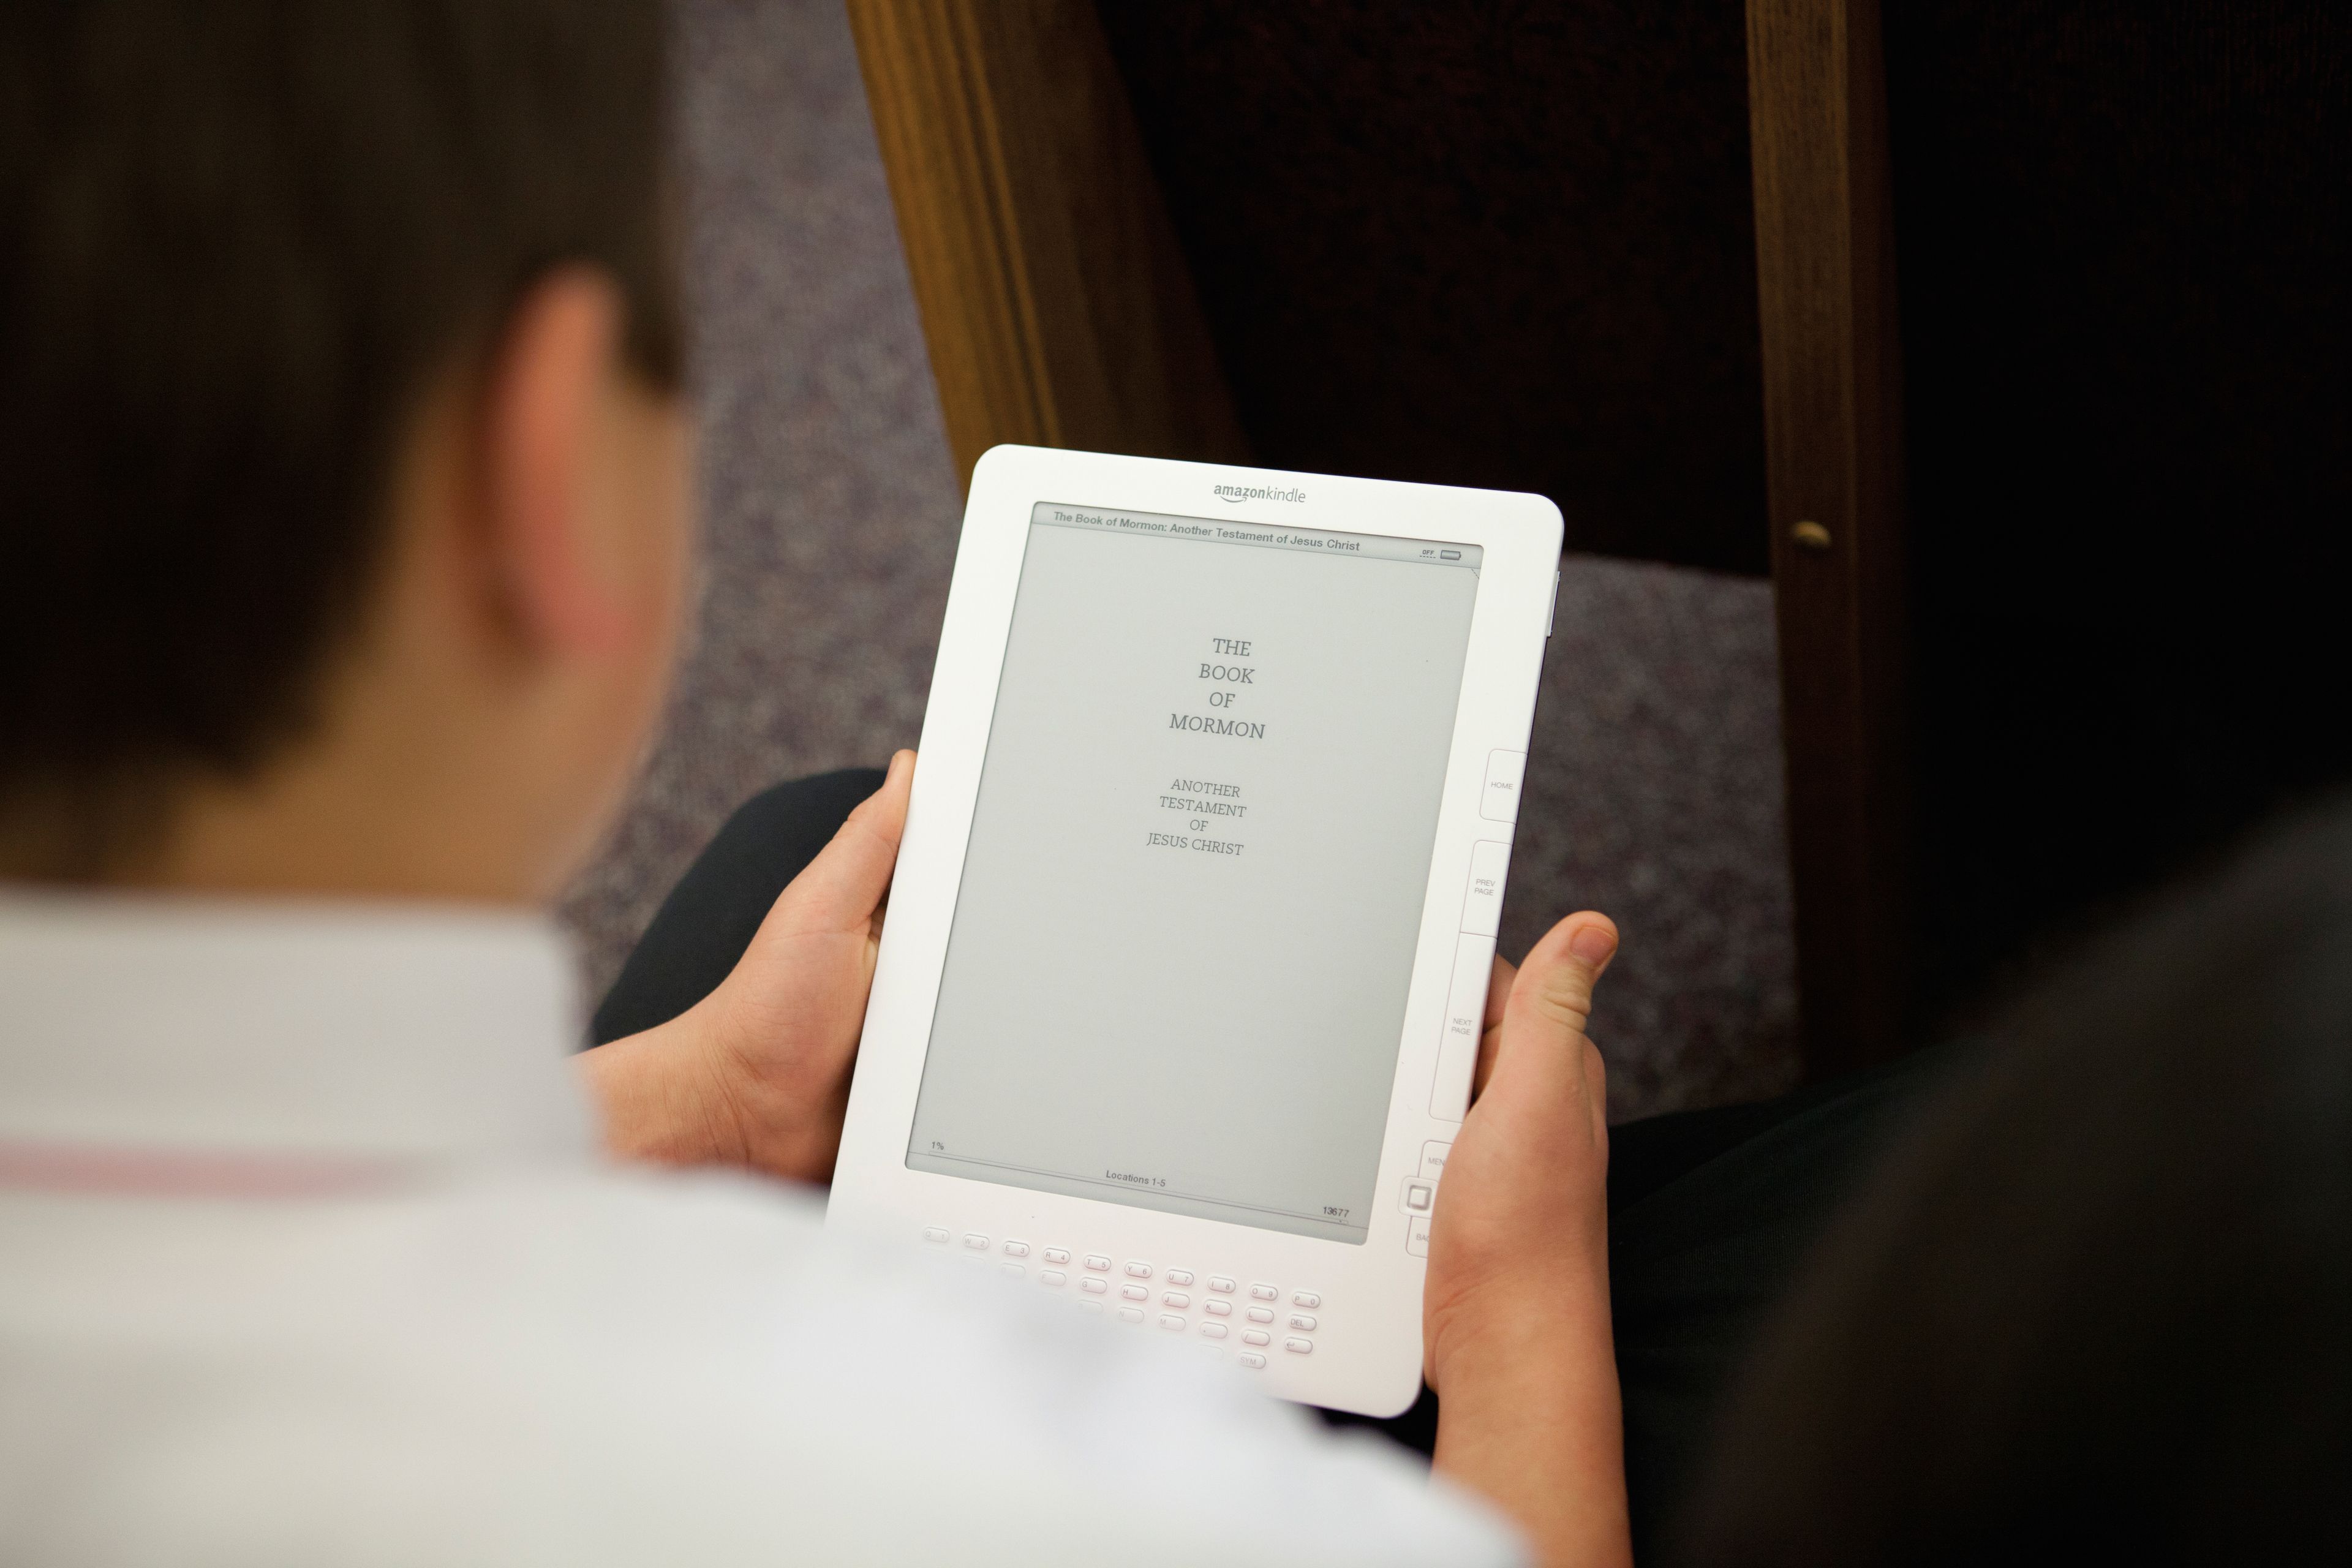 A young boy holds a tablet in his hands and starts reading the Book of Mormon.